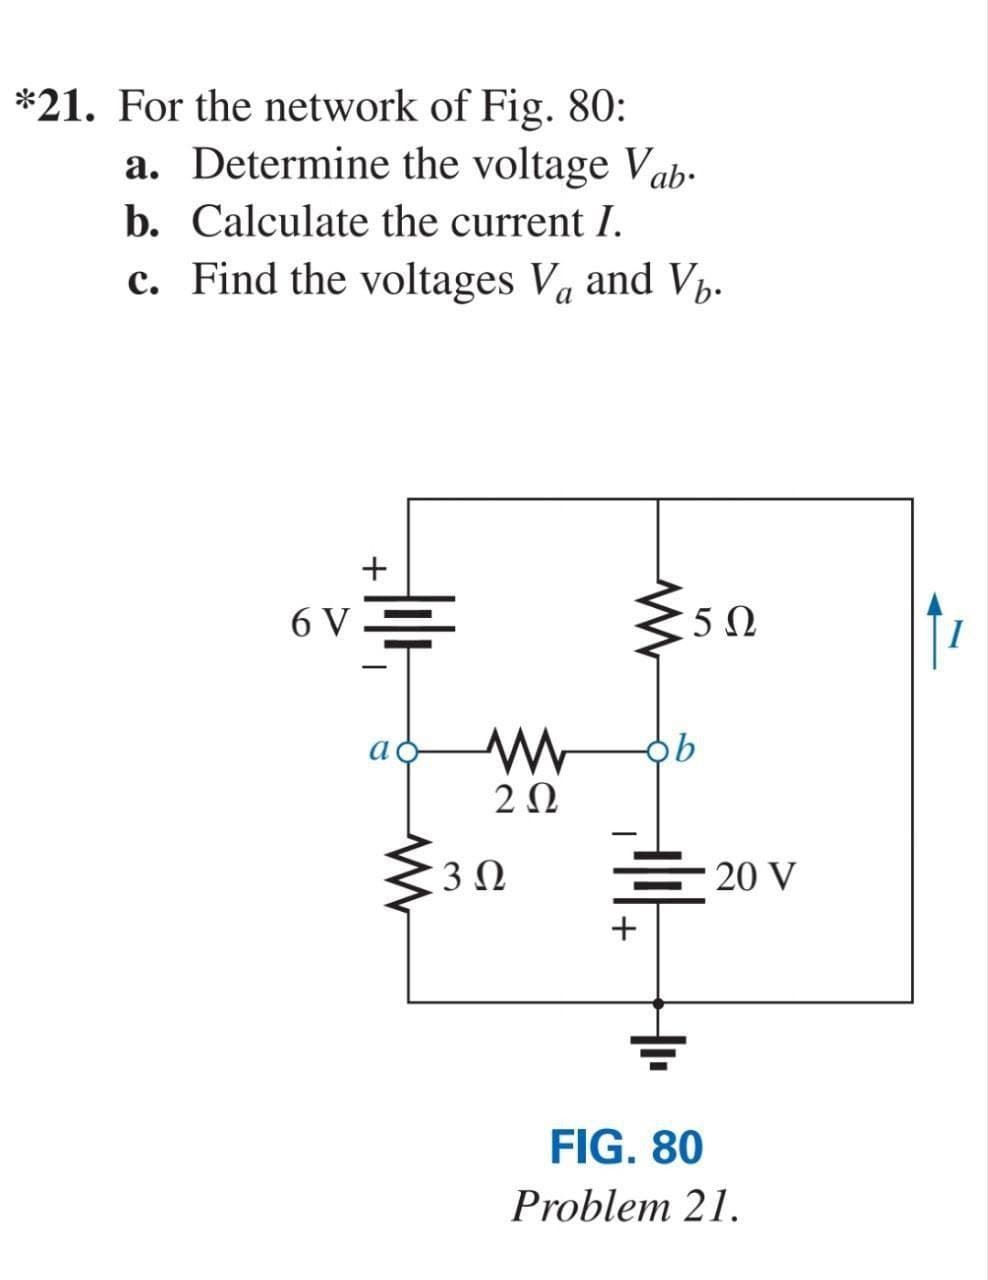 *21. For the network of Fig. 80:
a. Determine the voltage Vab.
b. Calculate the current I.
c. Find the voltages V, and V%.
6V
+
a
20
30
<5
50
니다.
+
・20 V
FIG. 80
Problem 21.